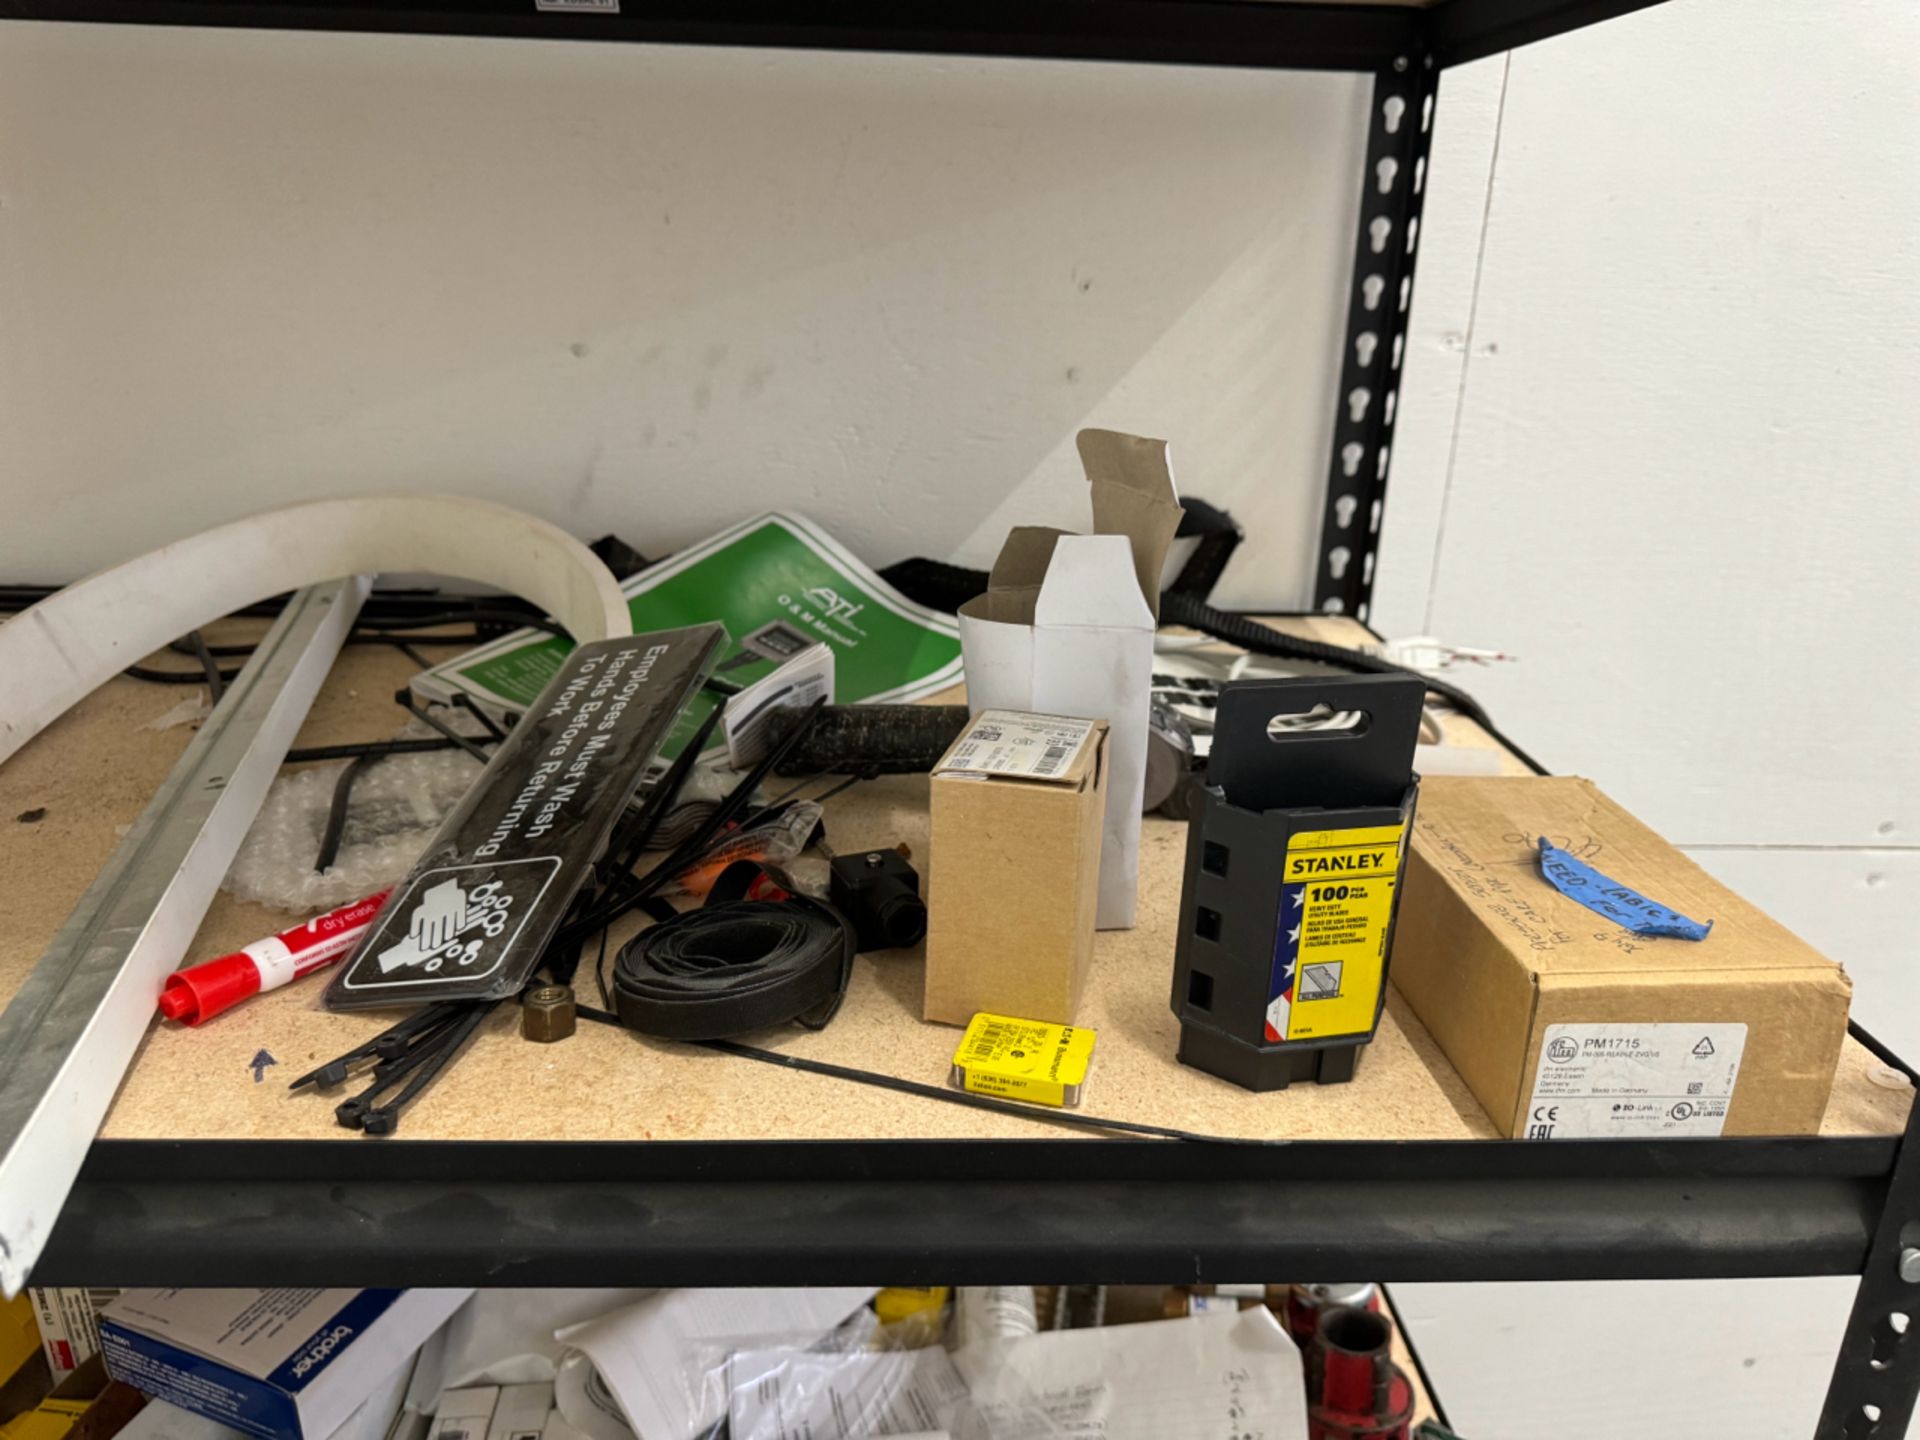 Lot Industrial Shelf w/ Contents Consisting of Circuit Breakers, Fiber, Fuses, Transit Tester, - Image 3 of 13